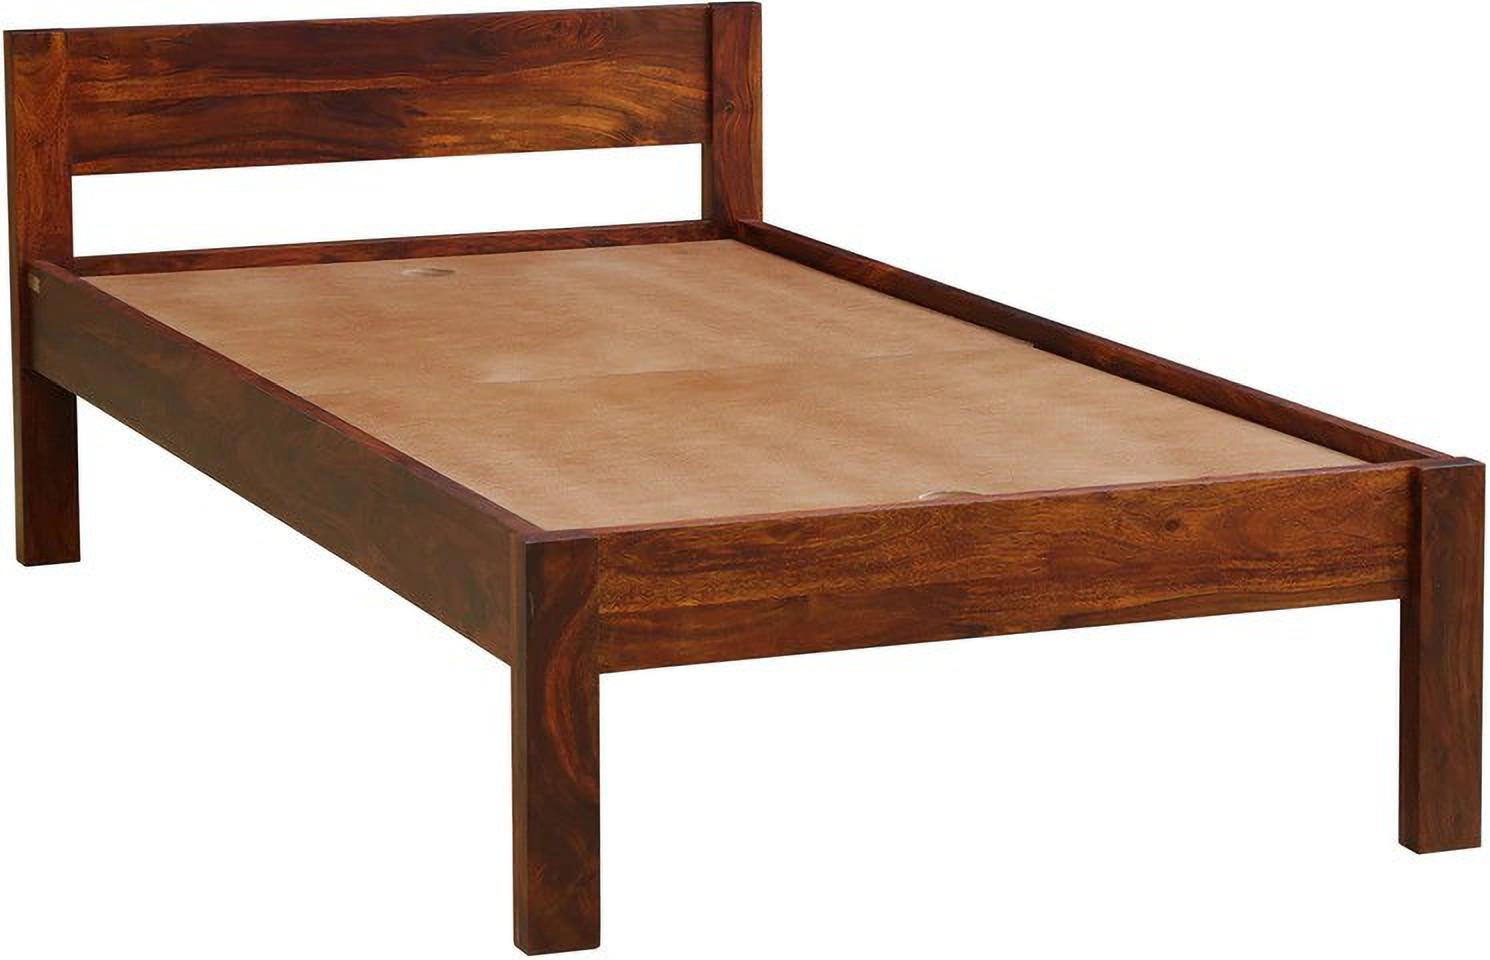 Aaram By Zebrs Solid Wood Single Bed (Finish Color - Honey Oak, Delivery Condition - DIY(Do-It-Yourself))